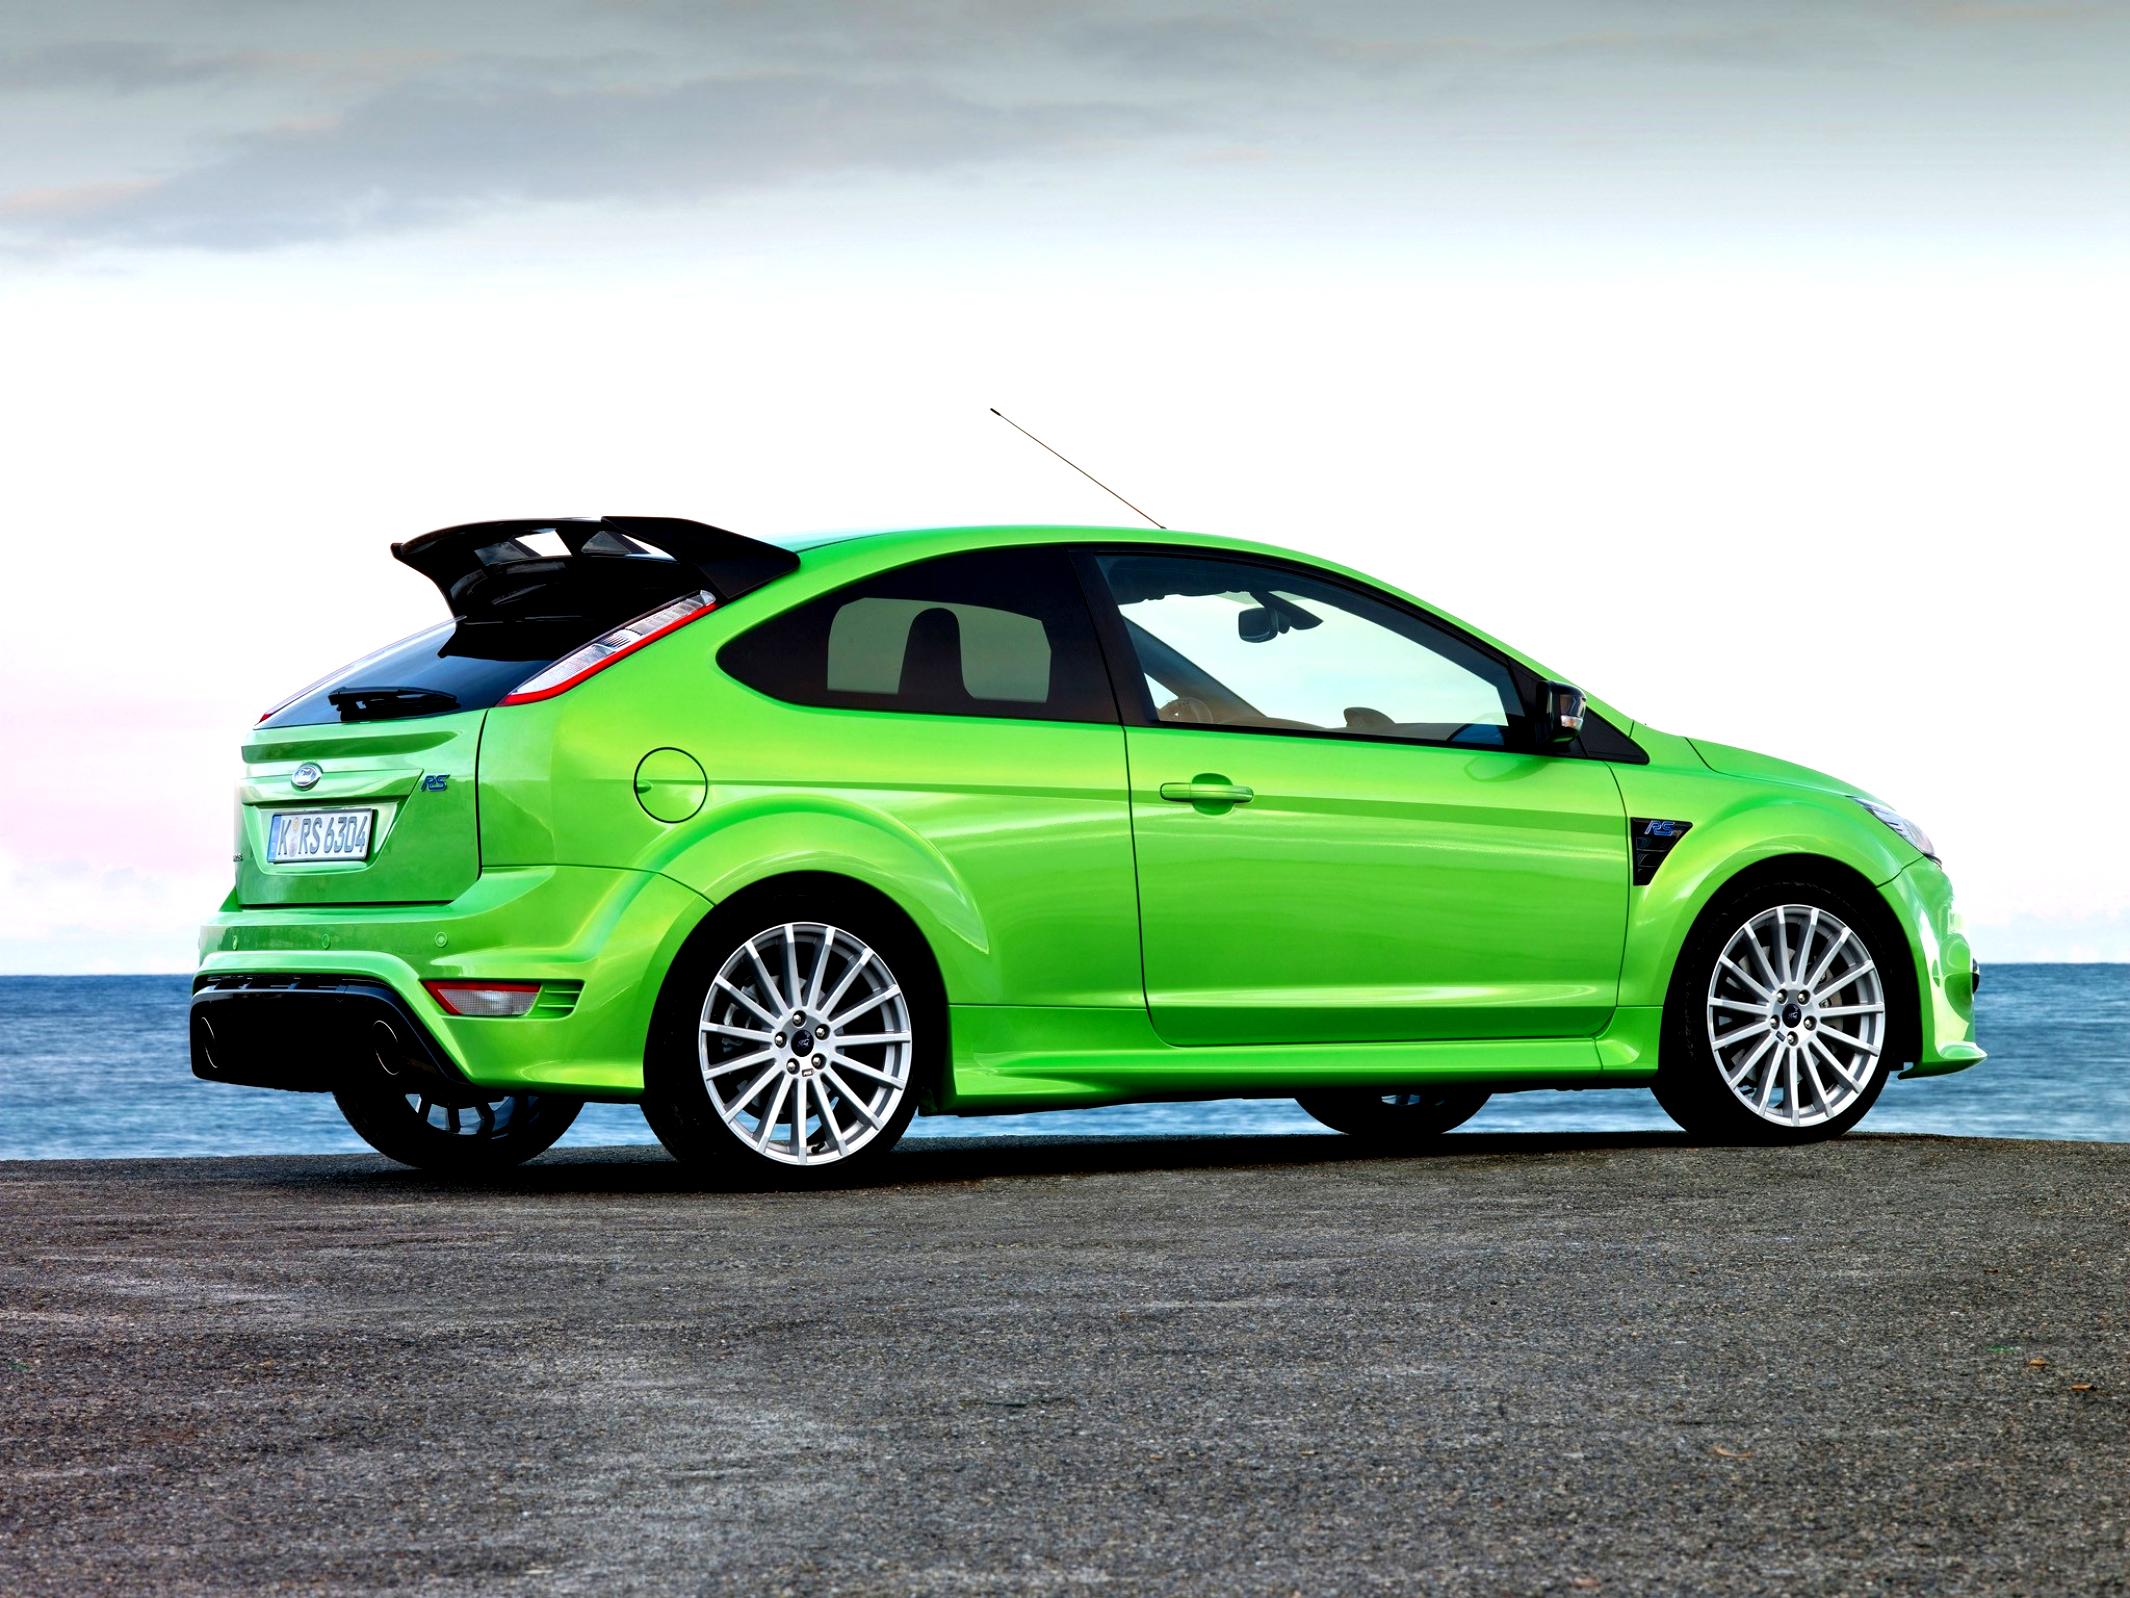 Ford Focus RS 2008 #21